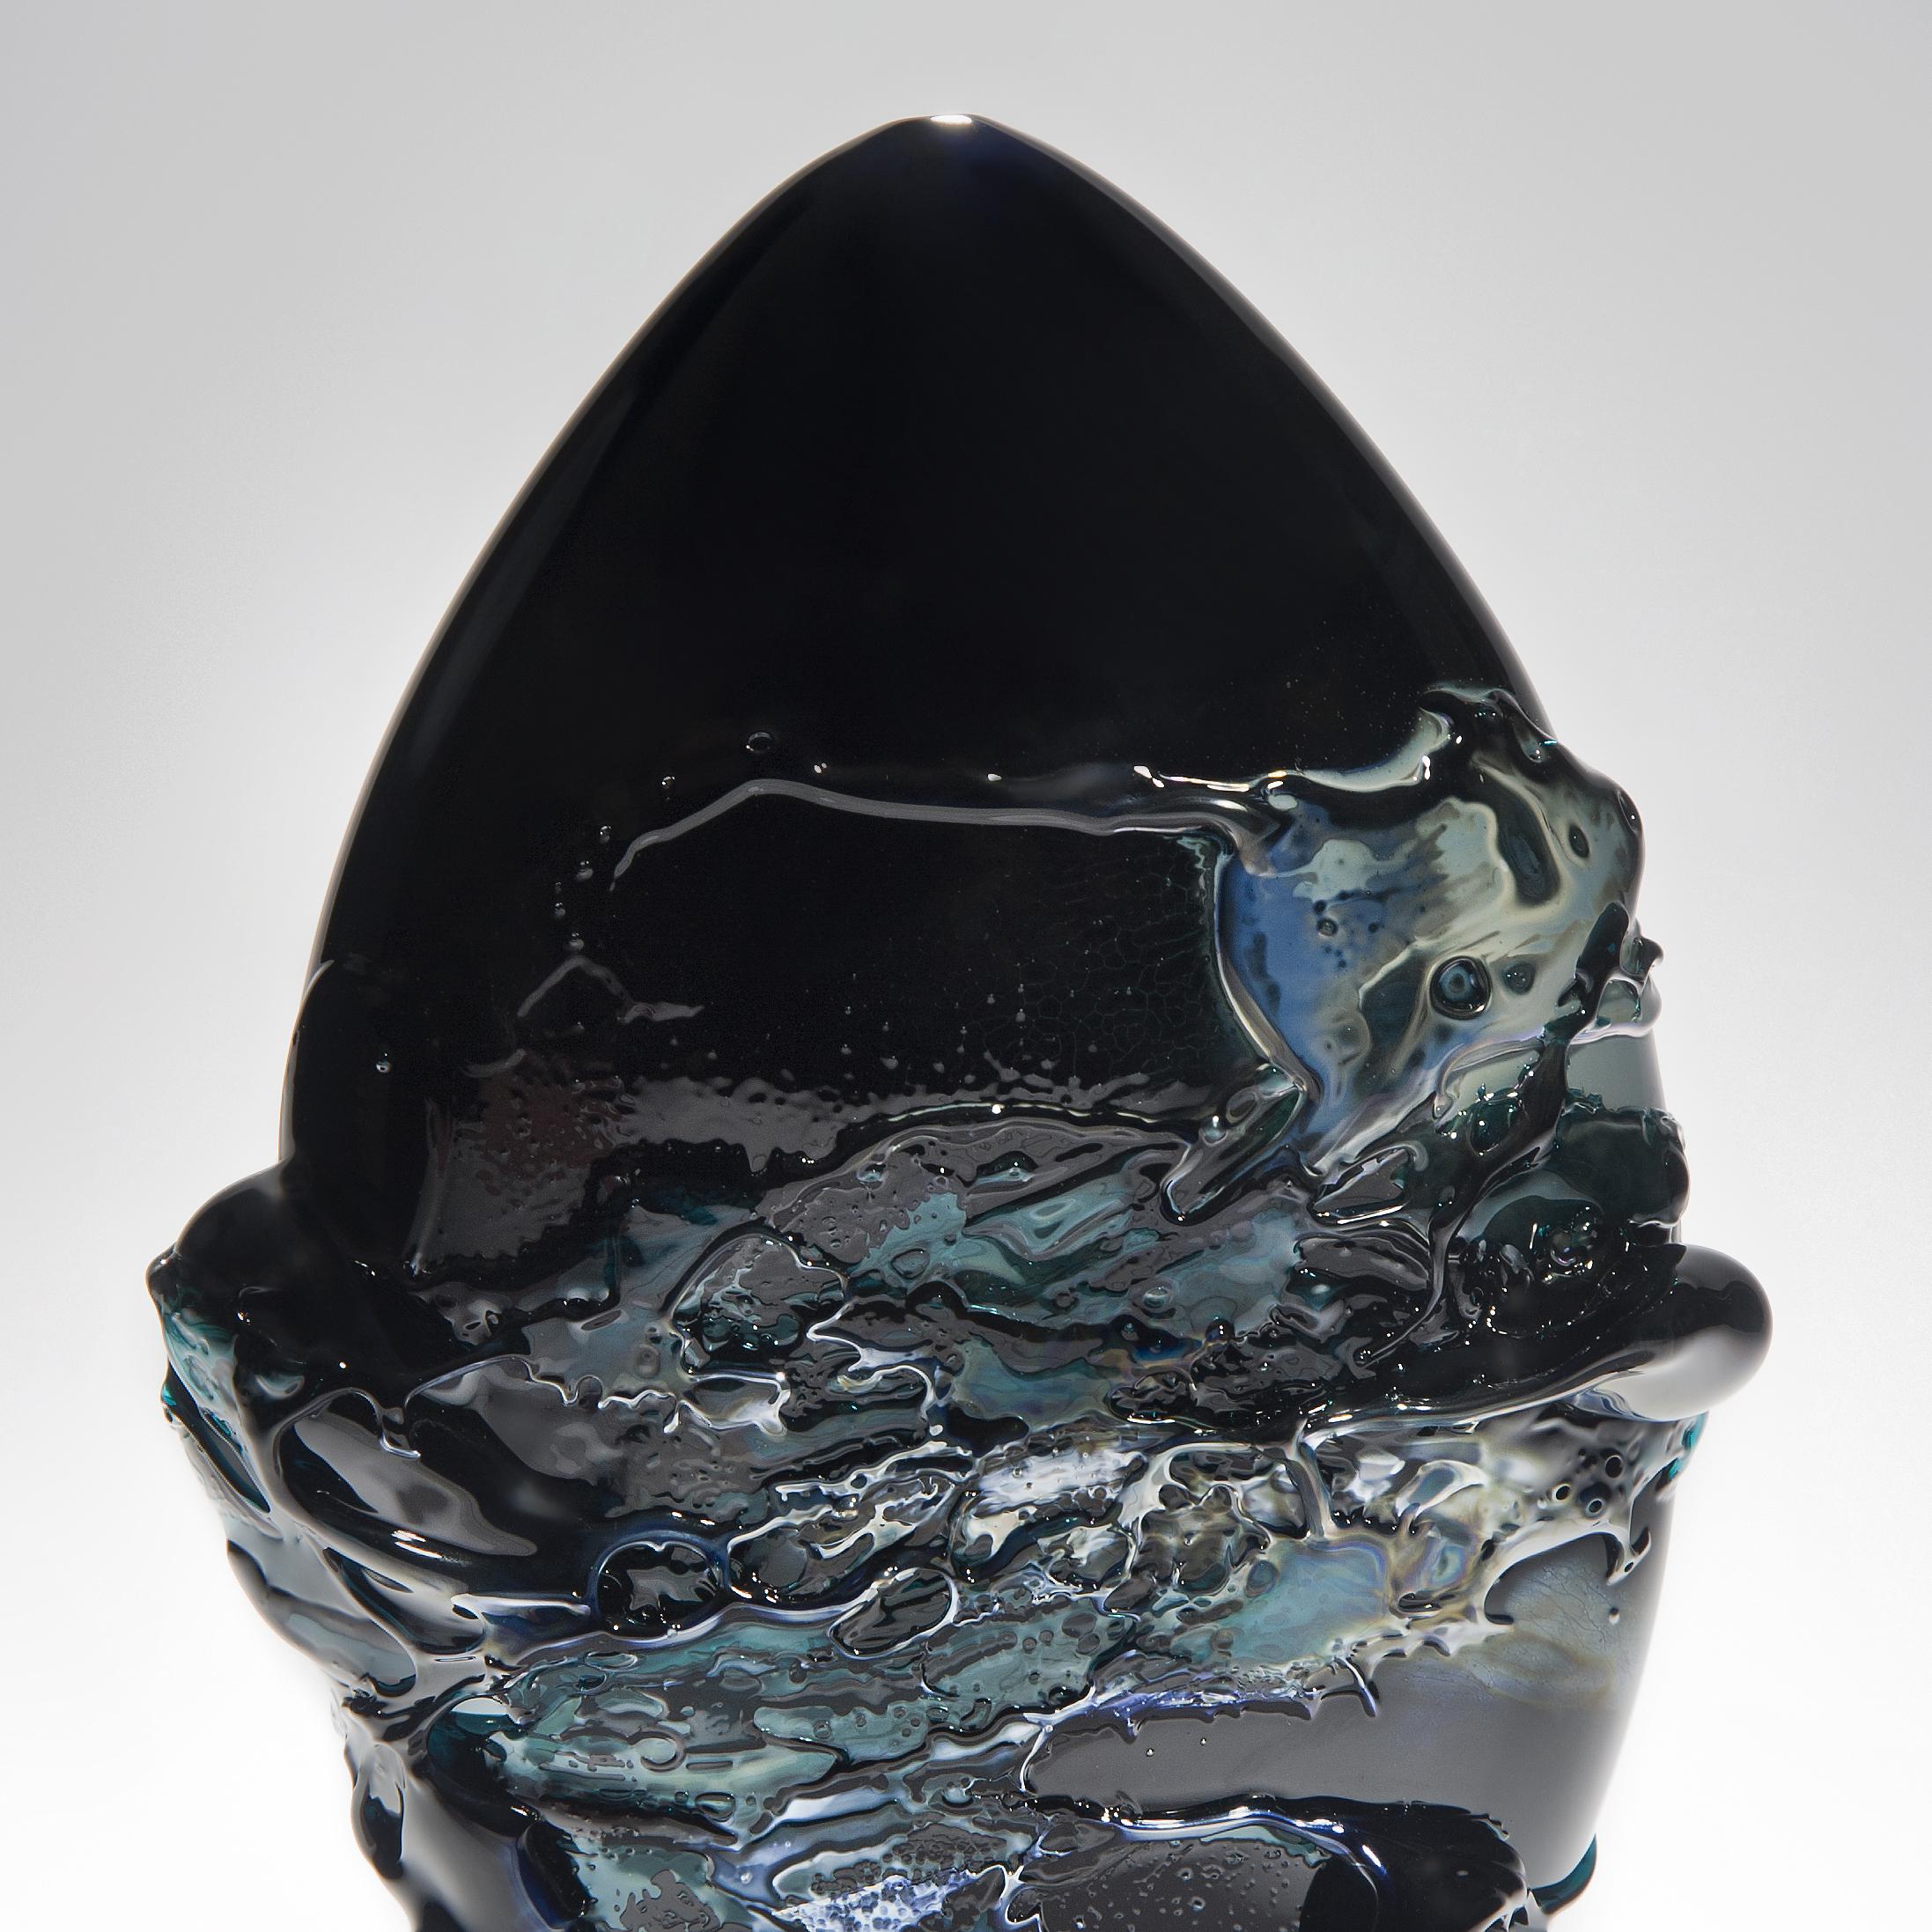 Organic Modern Black Sea, a Unique Black, Blue and Metallic Sheen Glass Vase by Bethany Wood